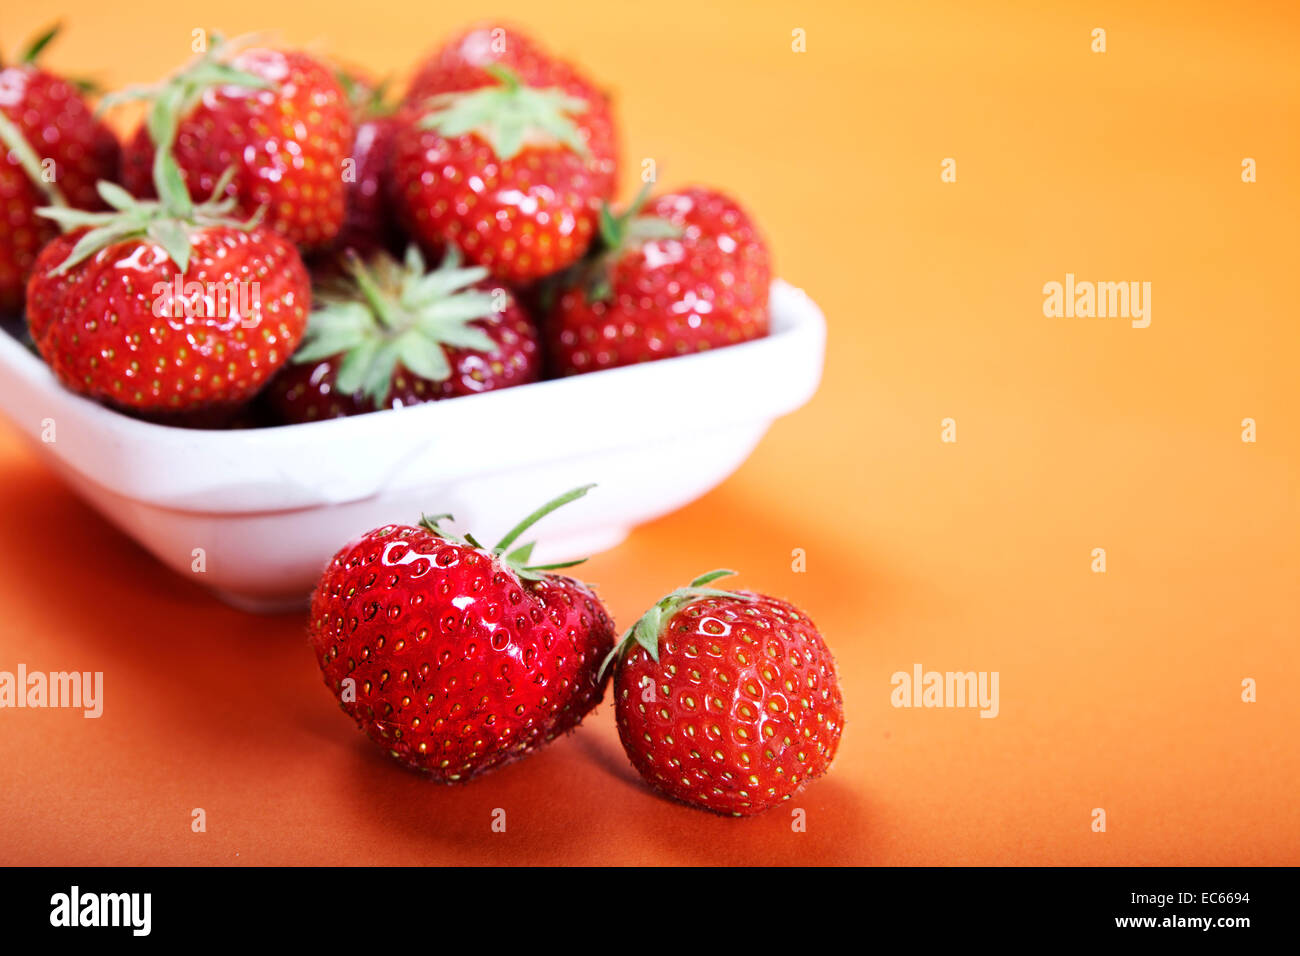 Strawberries in a porcelain dish Stock Photo